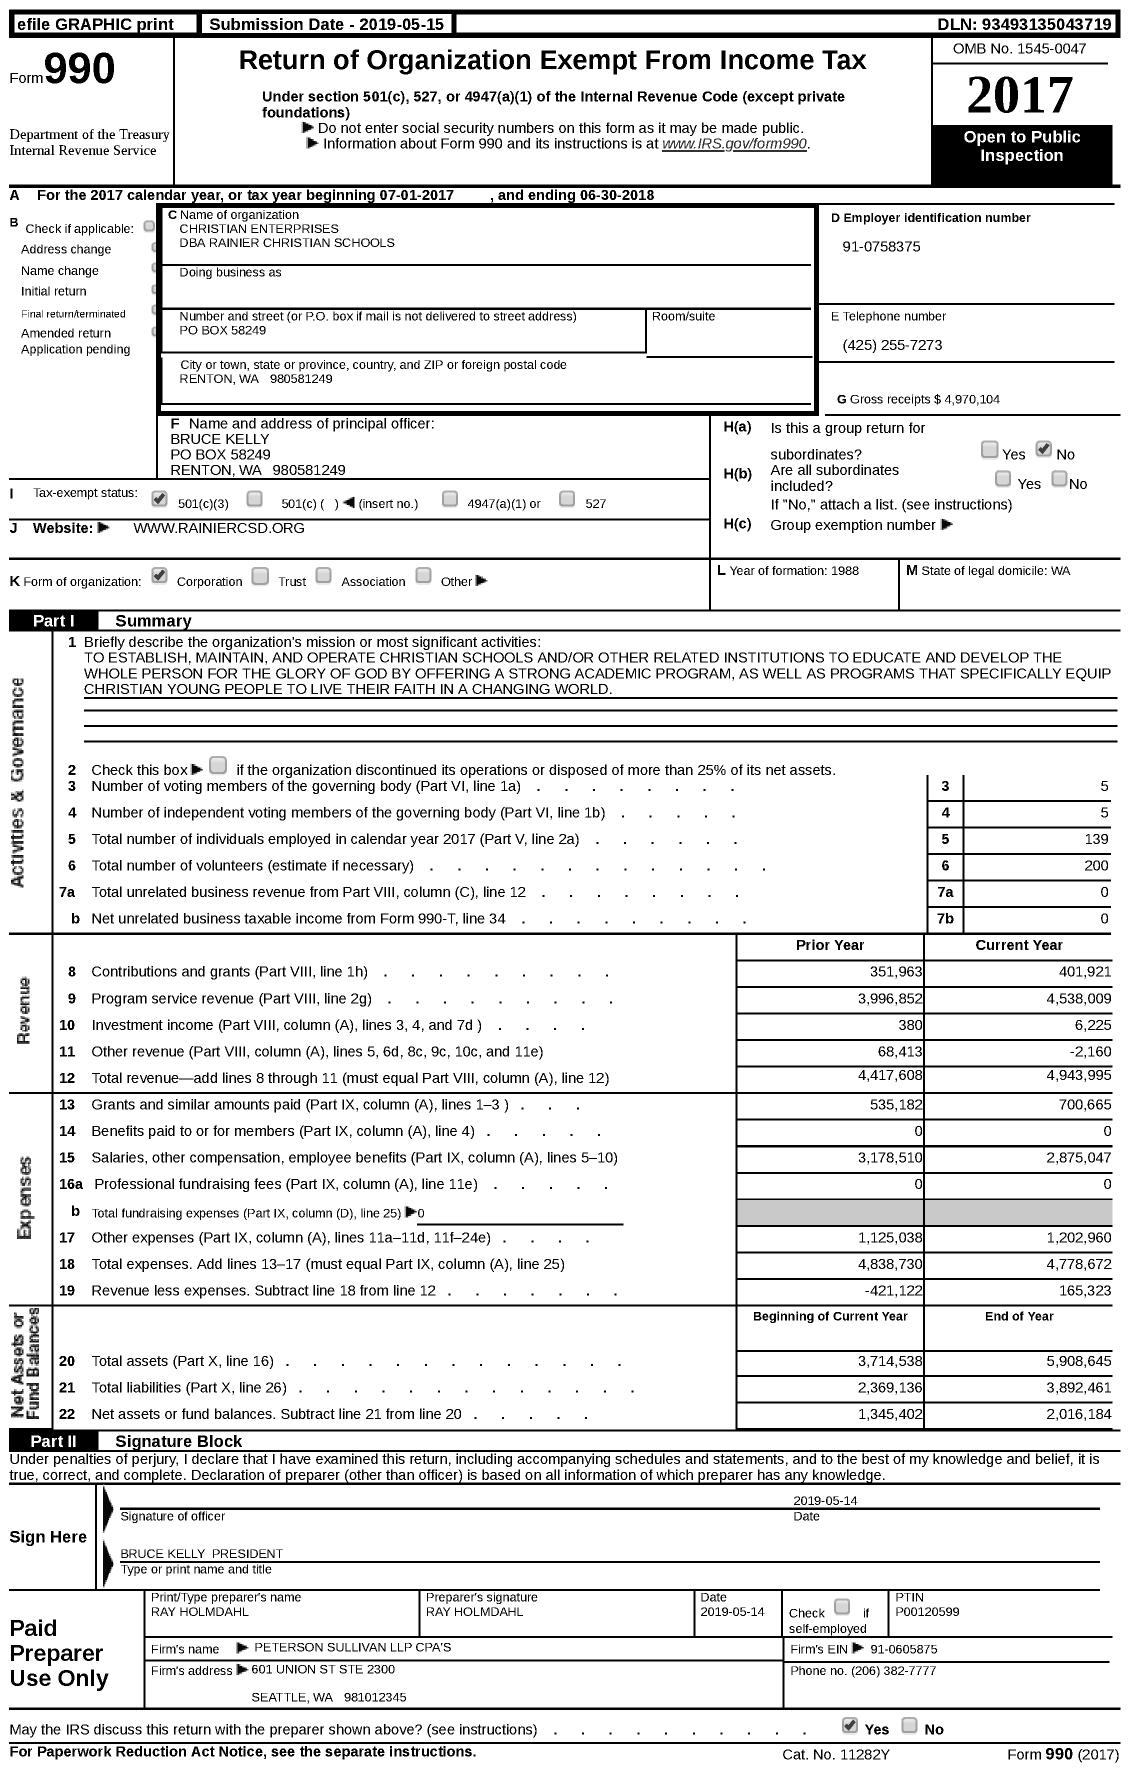 Image of first page of 2017 Form 990 for Rainier Christian Schools (RCS)